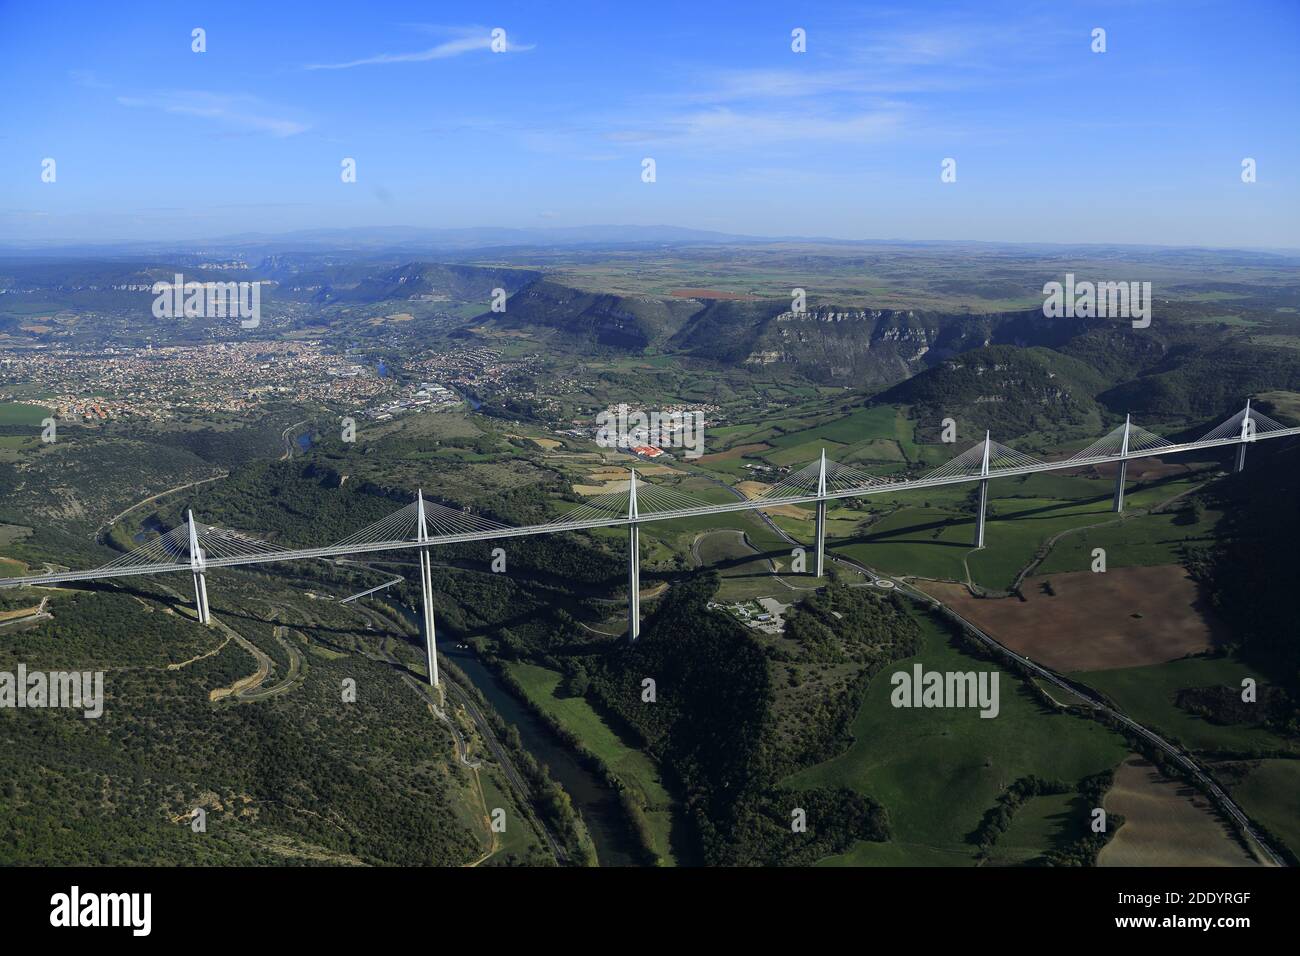 Millau (south of France): aerial view of the town and the viaduct, a multi-span cable-stayed bridge across the Tarn Valley. Stock Photo